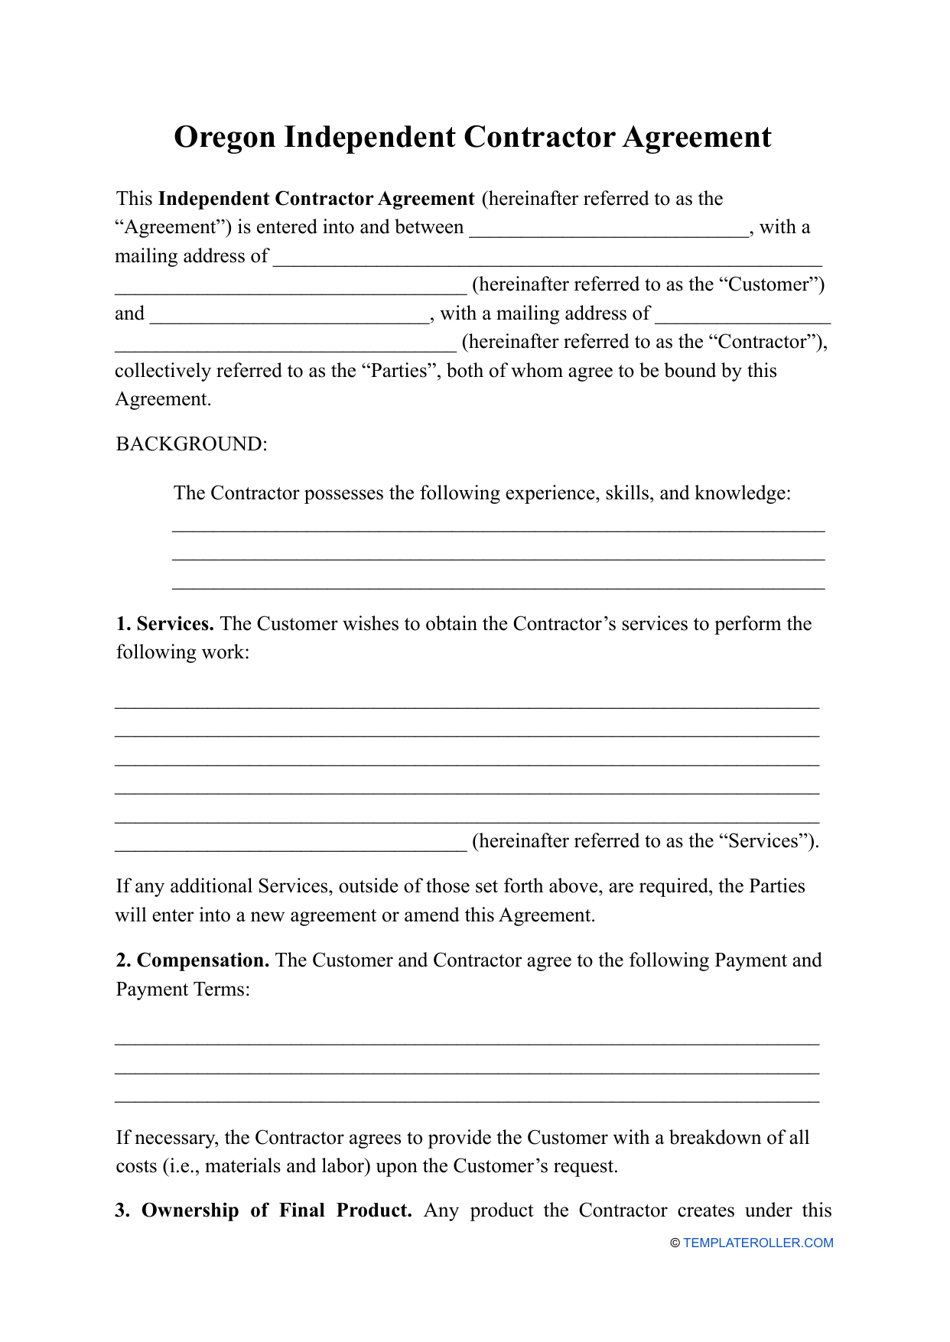 Independent Contractor Agreement Template - Oregon, Page 1